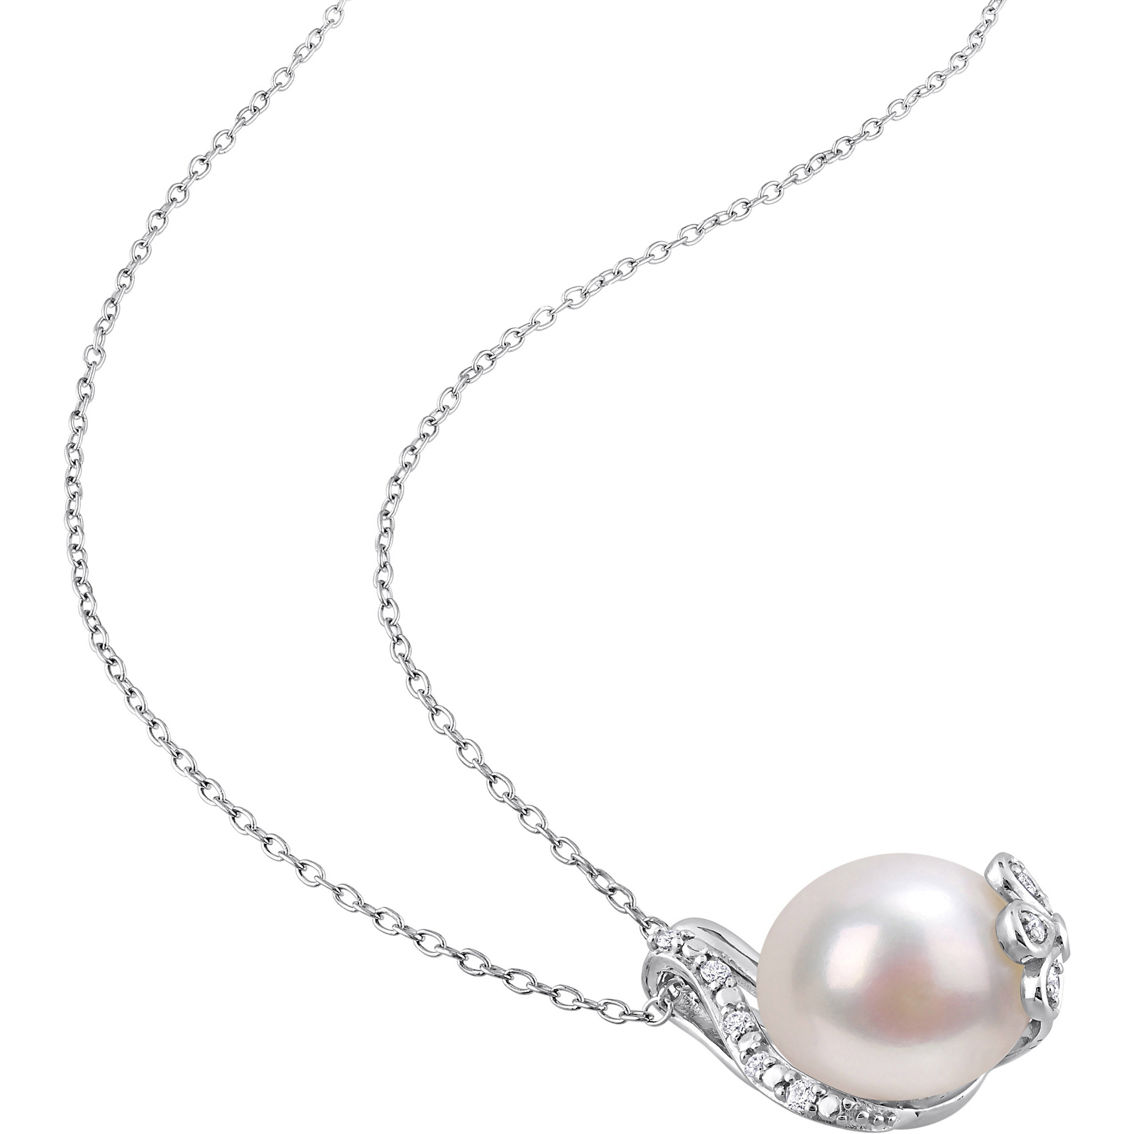 Sofia B. Cultured Freshwater Pearl Diamond Wrap Floral Necklace & Ring 2 pc. Set - Image 3 of 5